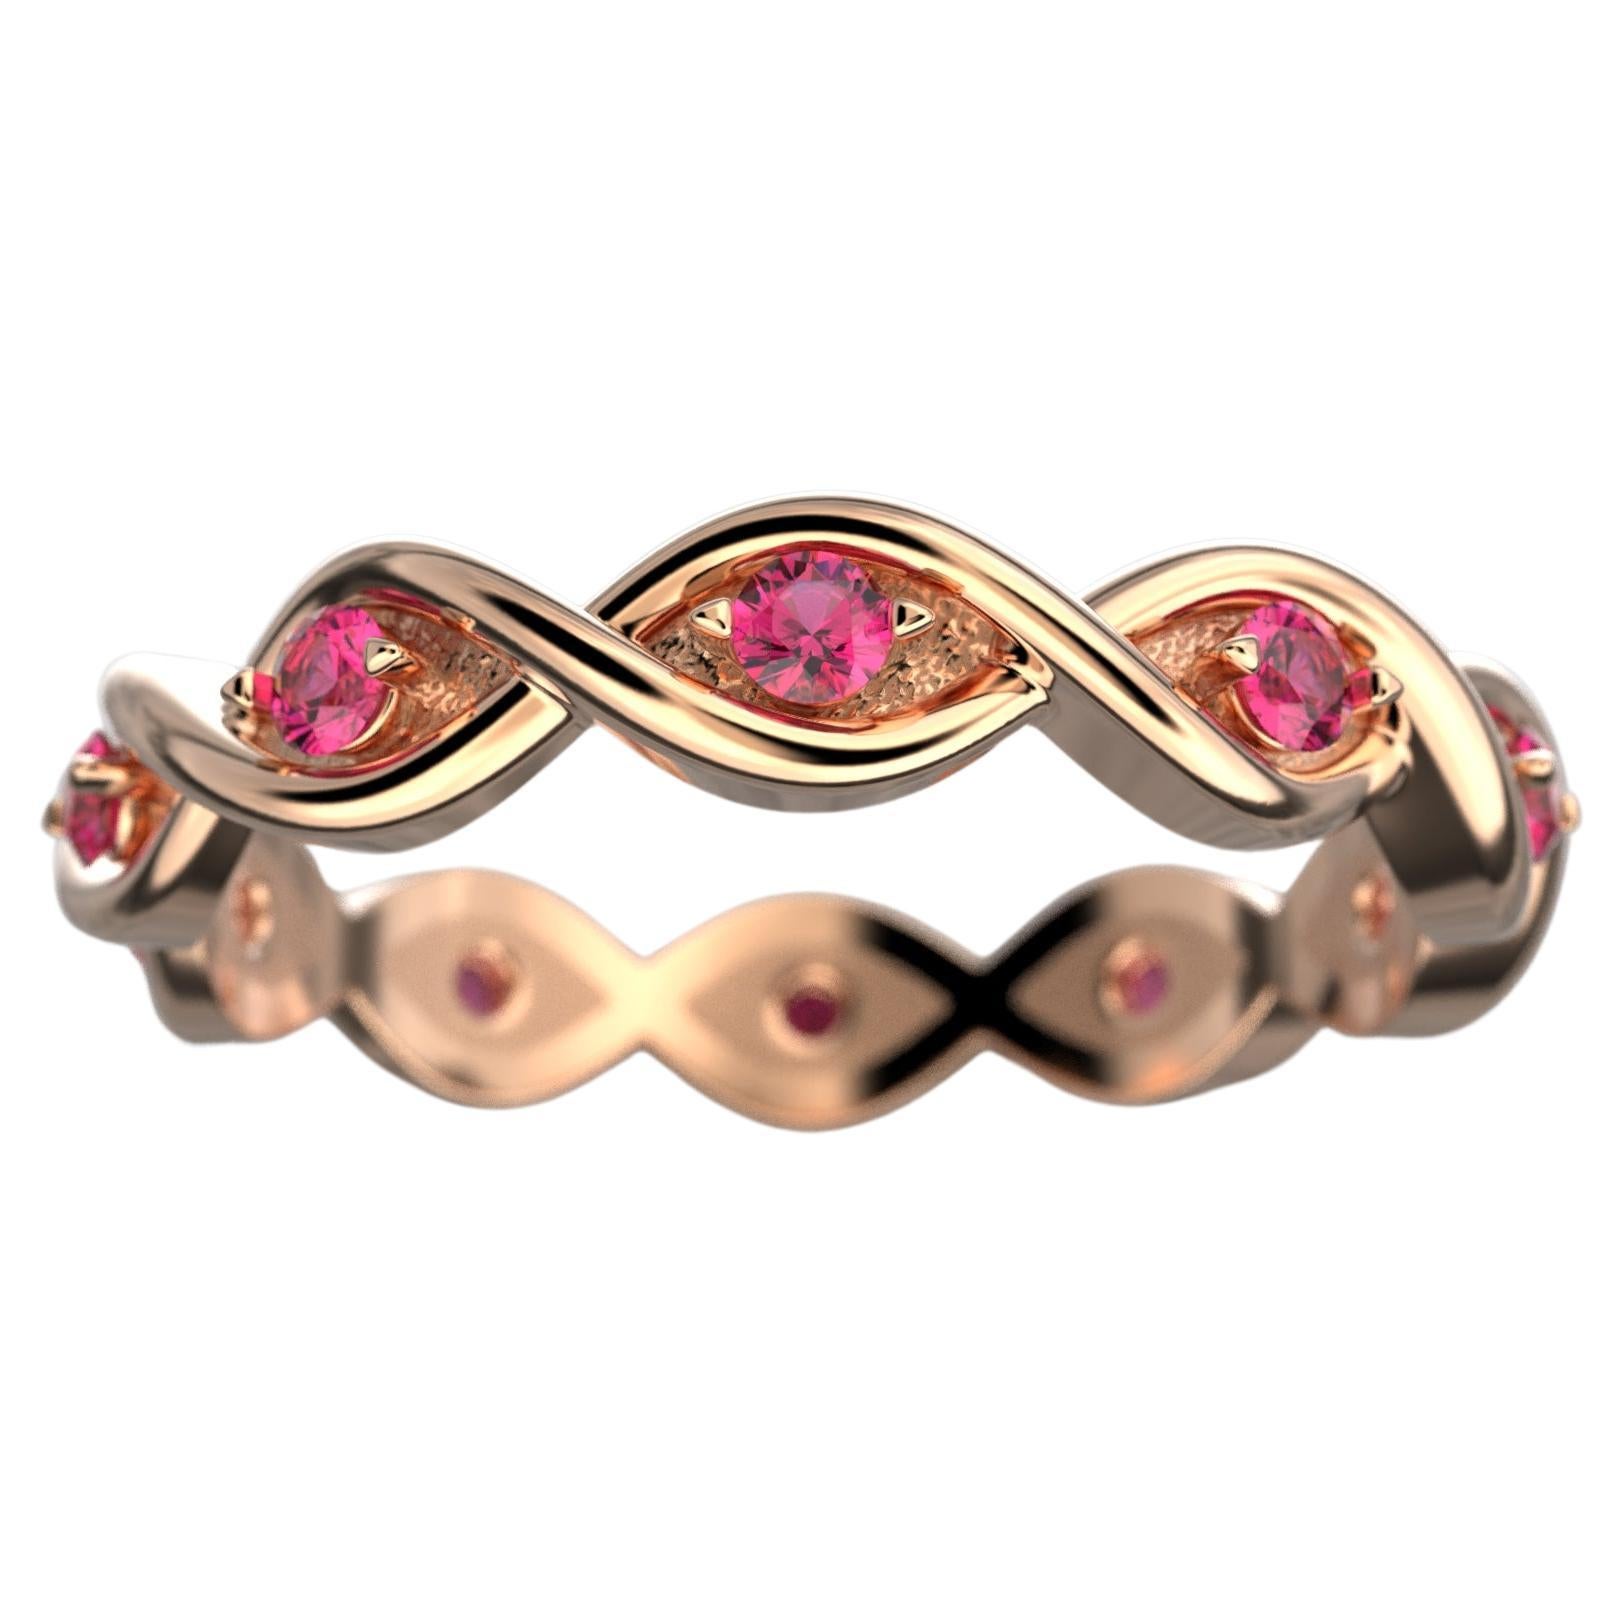 For Sale:  Eternity Ruby Band Handcrafted in Italy in 18k Solid Gold by Oltremare Gioielli